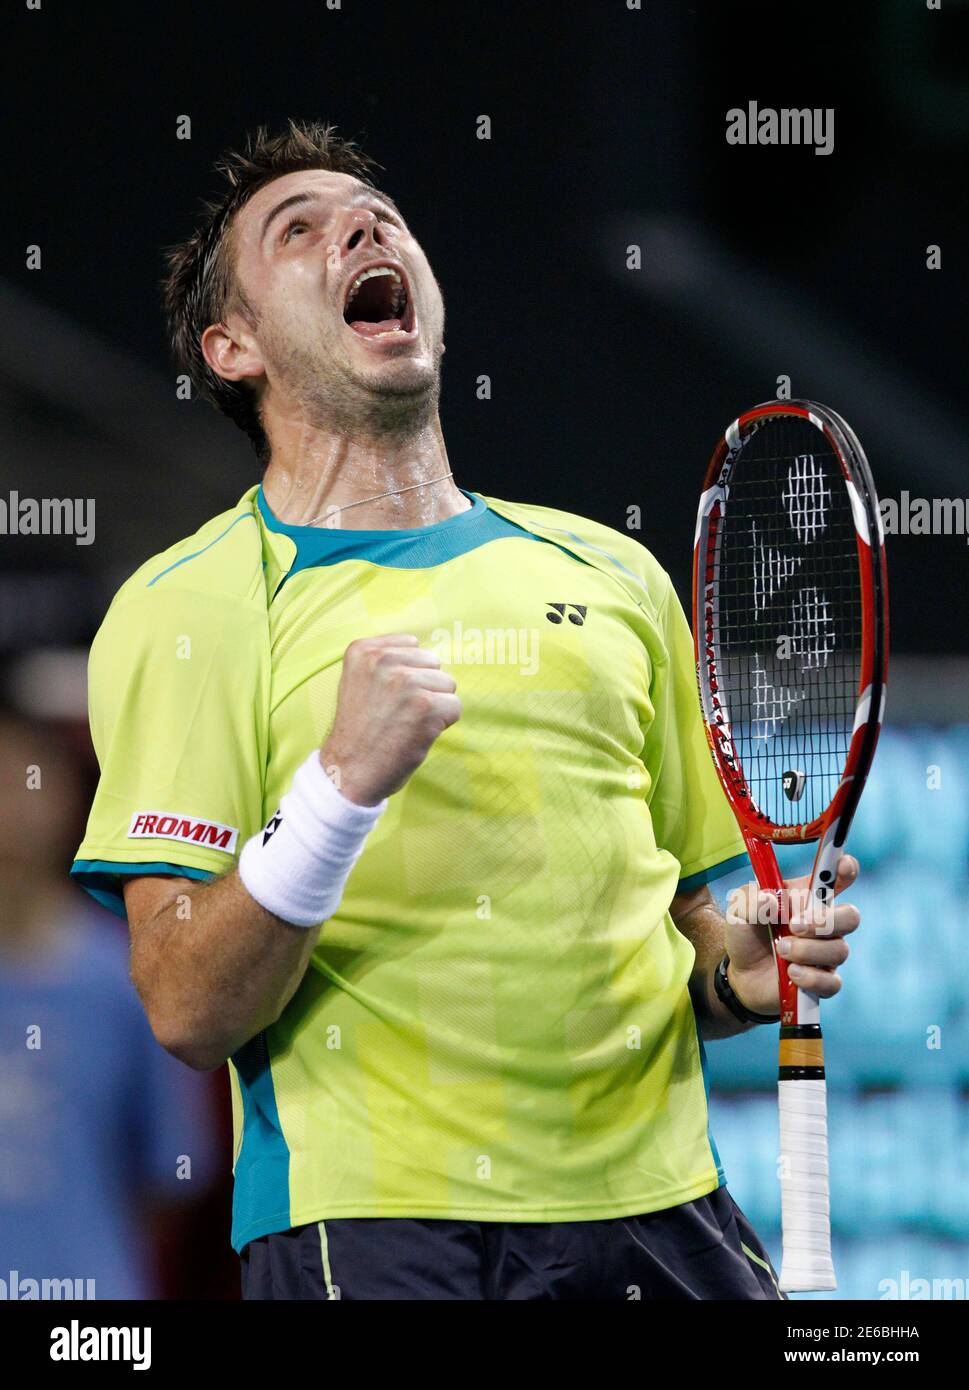 Stanislas Wawrinka of Switzerland celebrates his win over Jeremy Chardy of  France during their men's singles match at the Japan Open tennis  championships in Tokyo, October 3, 2012. REUTERS/Yuriko Nakao (JAPAN -